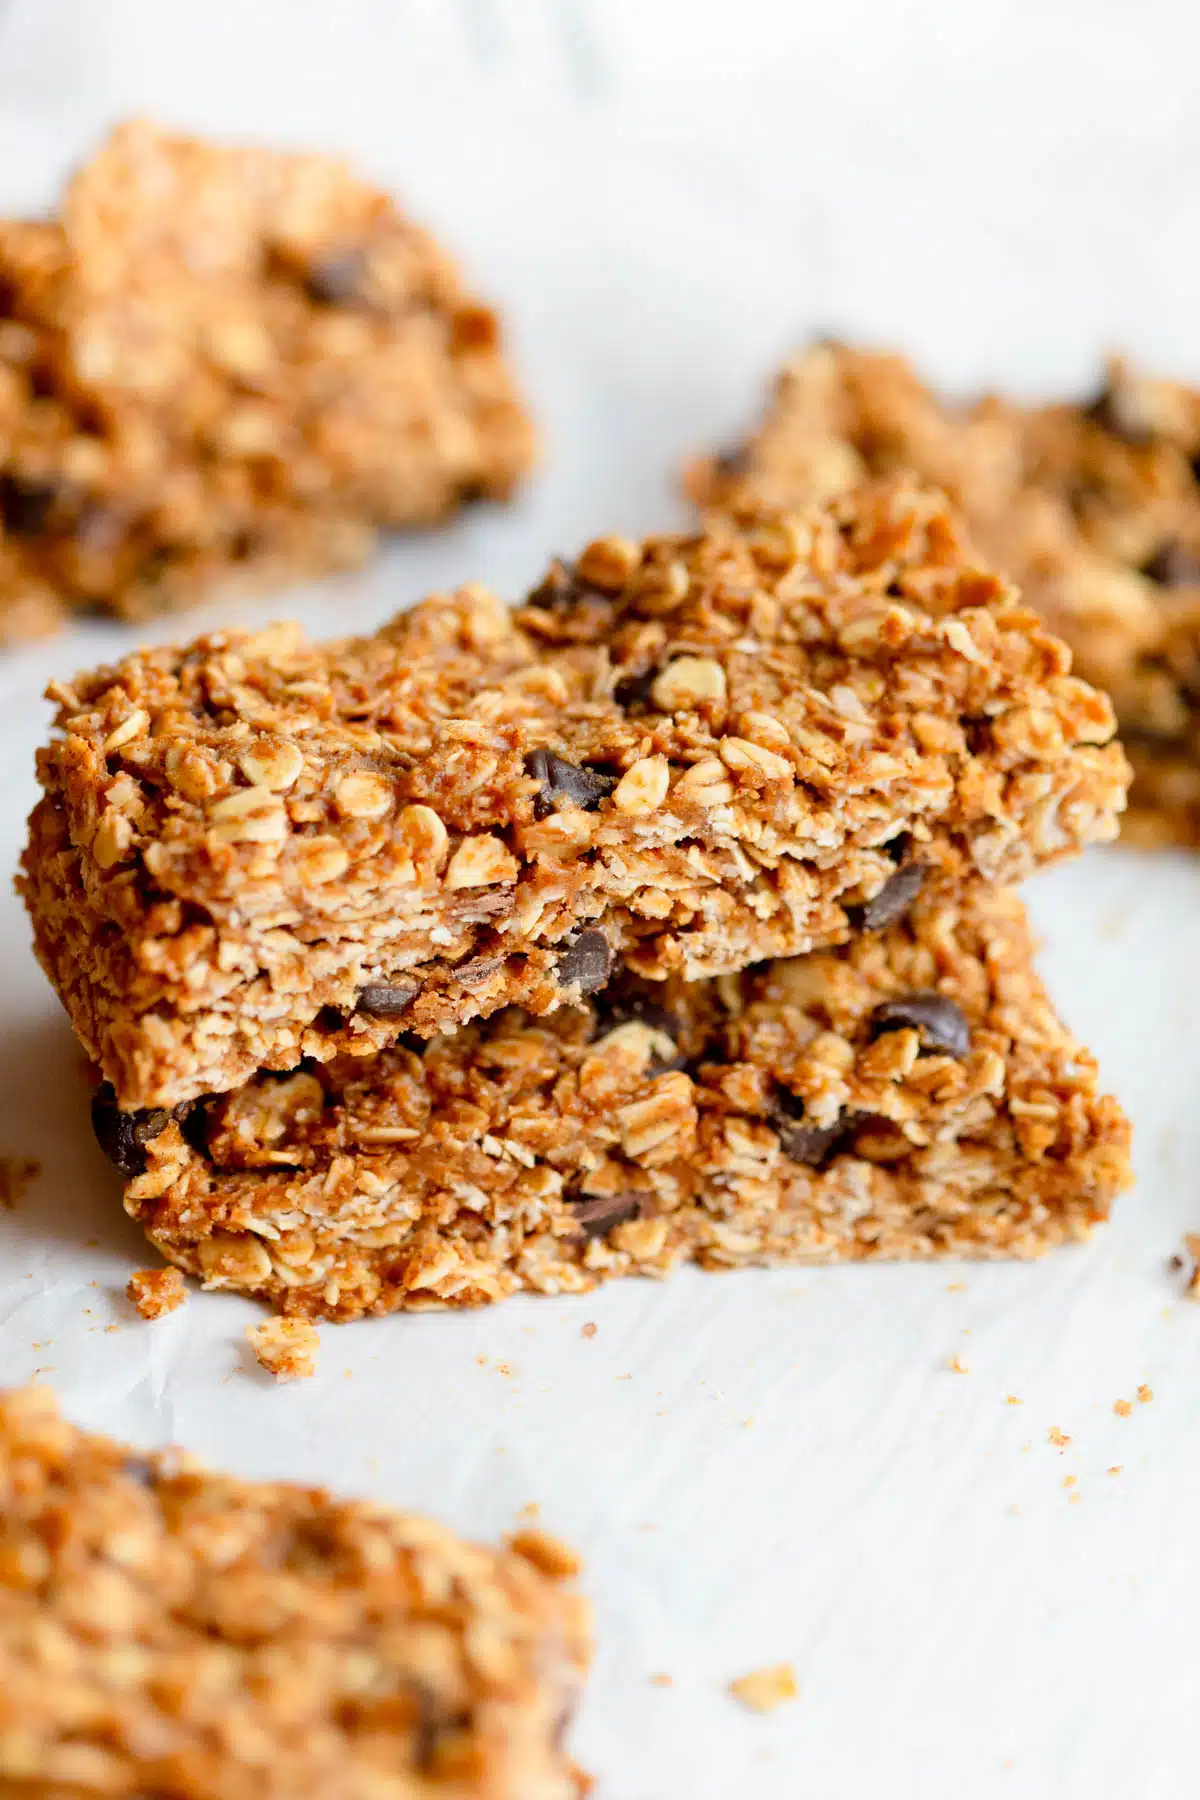 Almond Butter Granola Bars stacked on top of each other with other bars in the background.